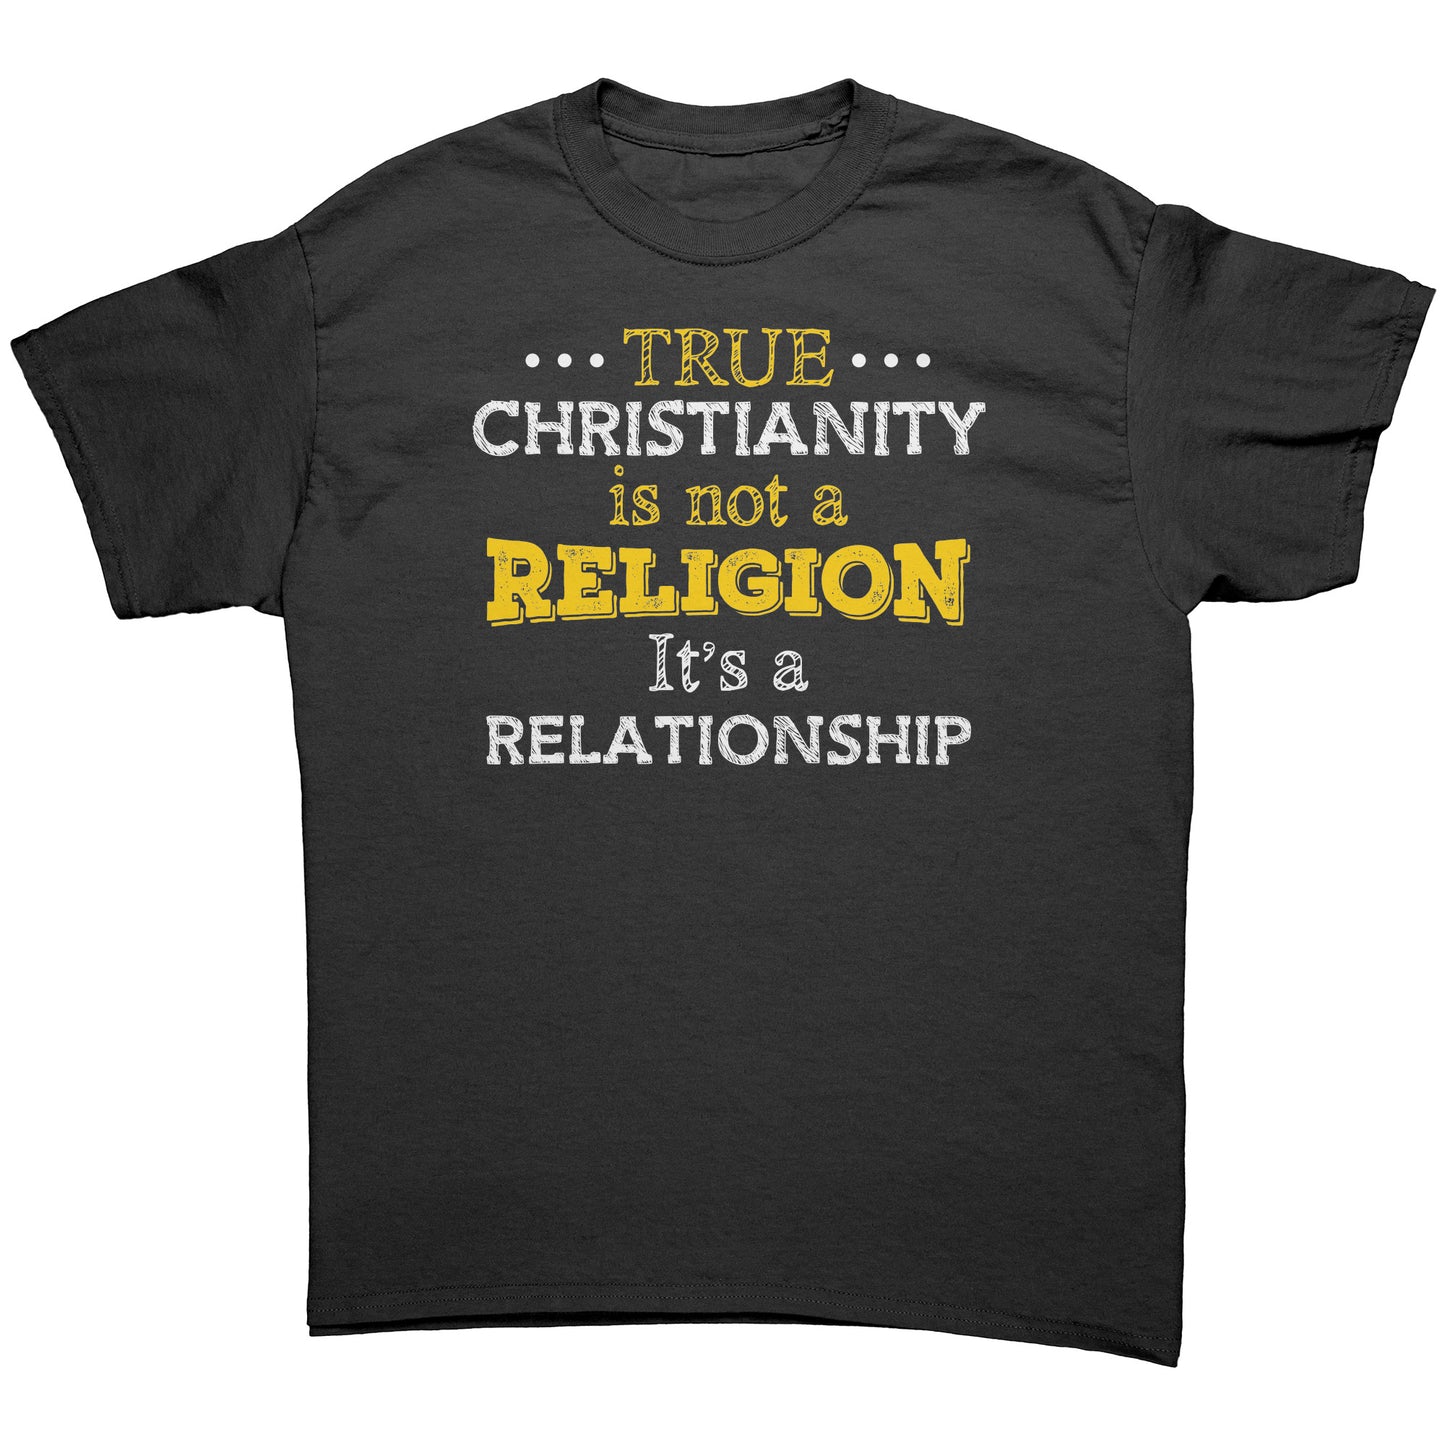 True Christianity Is Not A Religion But A Relationship Men's T-Shirt Part 1